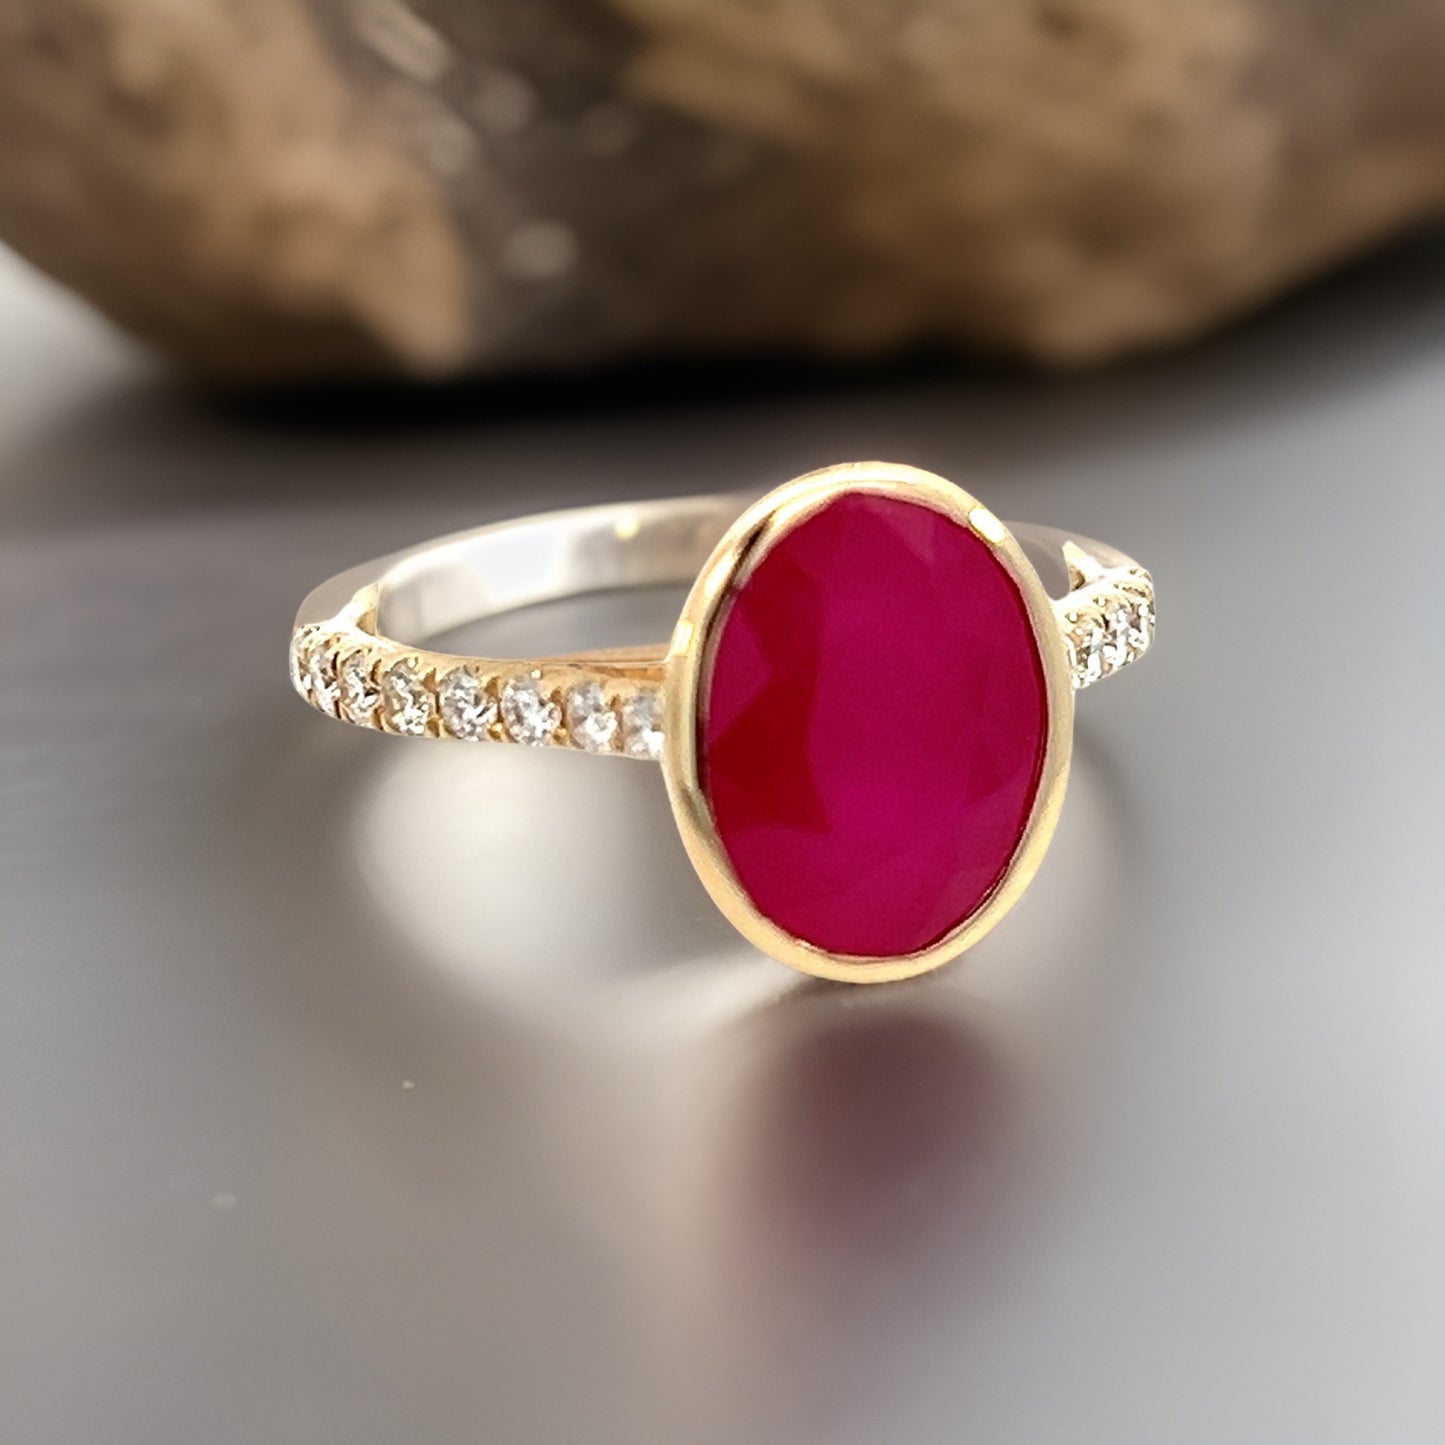 Natural Ruby Diamond Ring 6.75 14k Y Gold 4.38 TCW Certified $4,950 310583